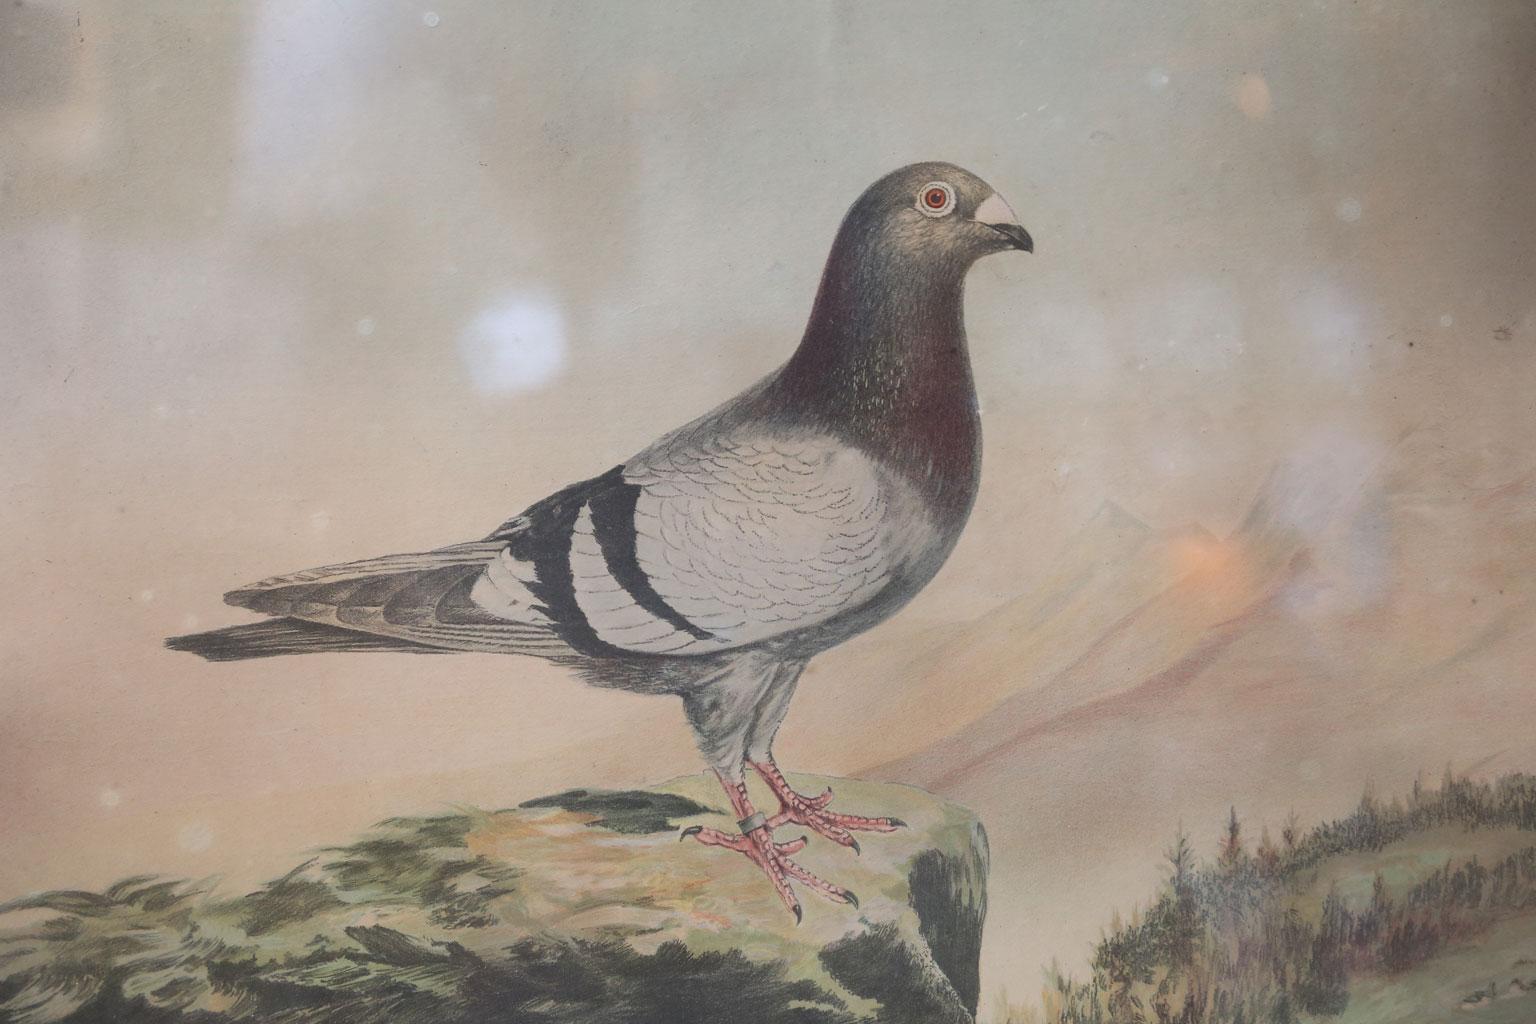 These Lithographs were awarded as prizes to carrier pigeons  This is an original trophy with a hand-lettered information of the pigeon placed on the troply.